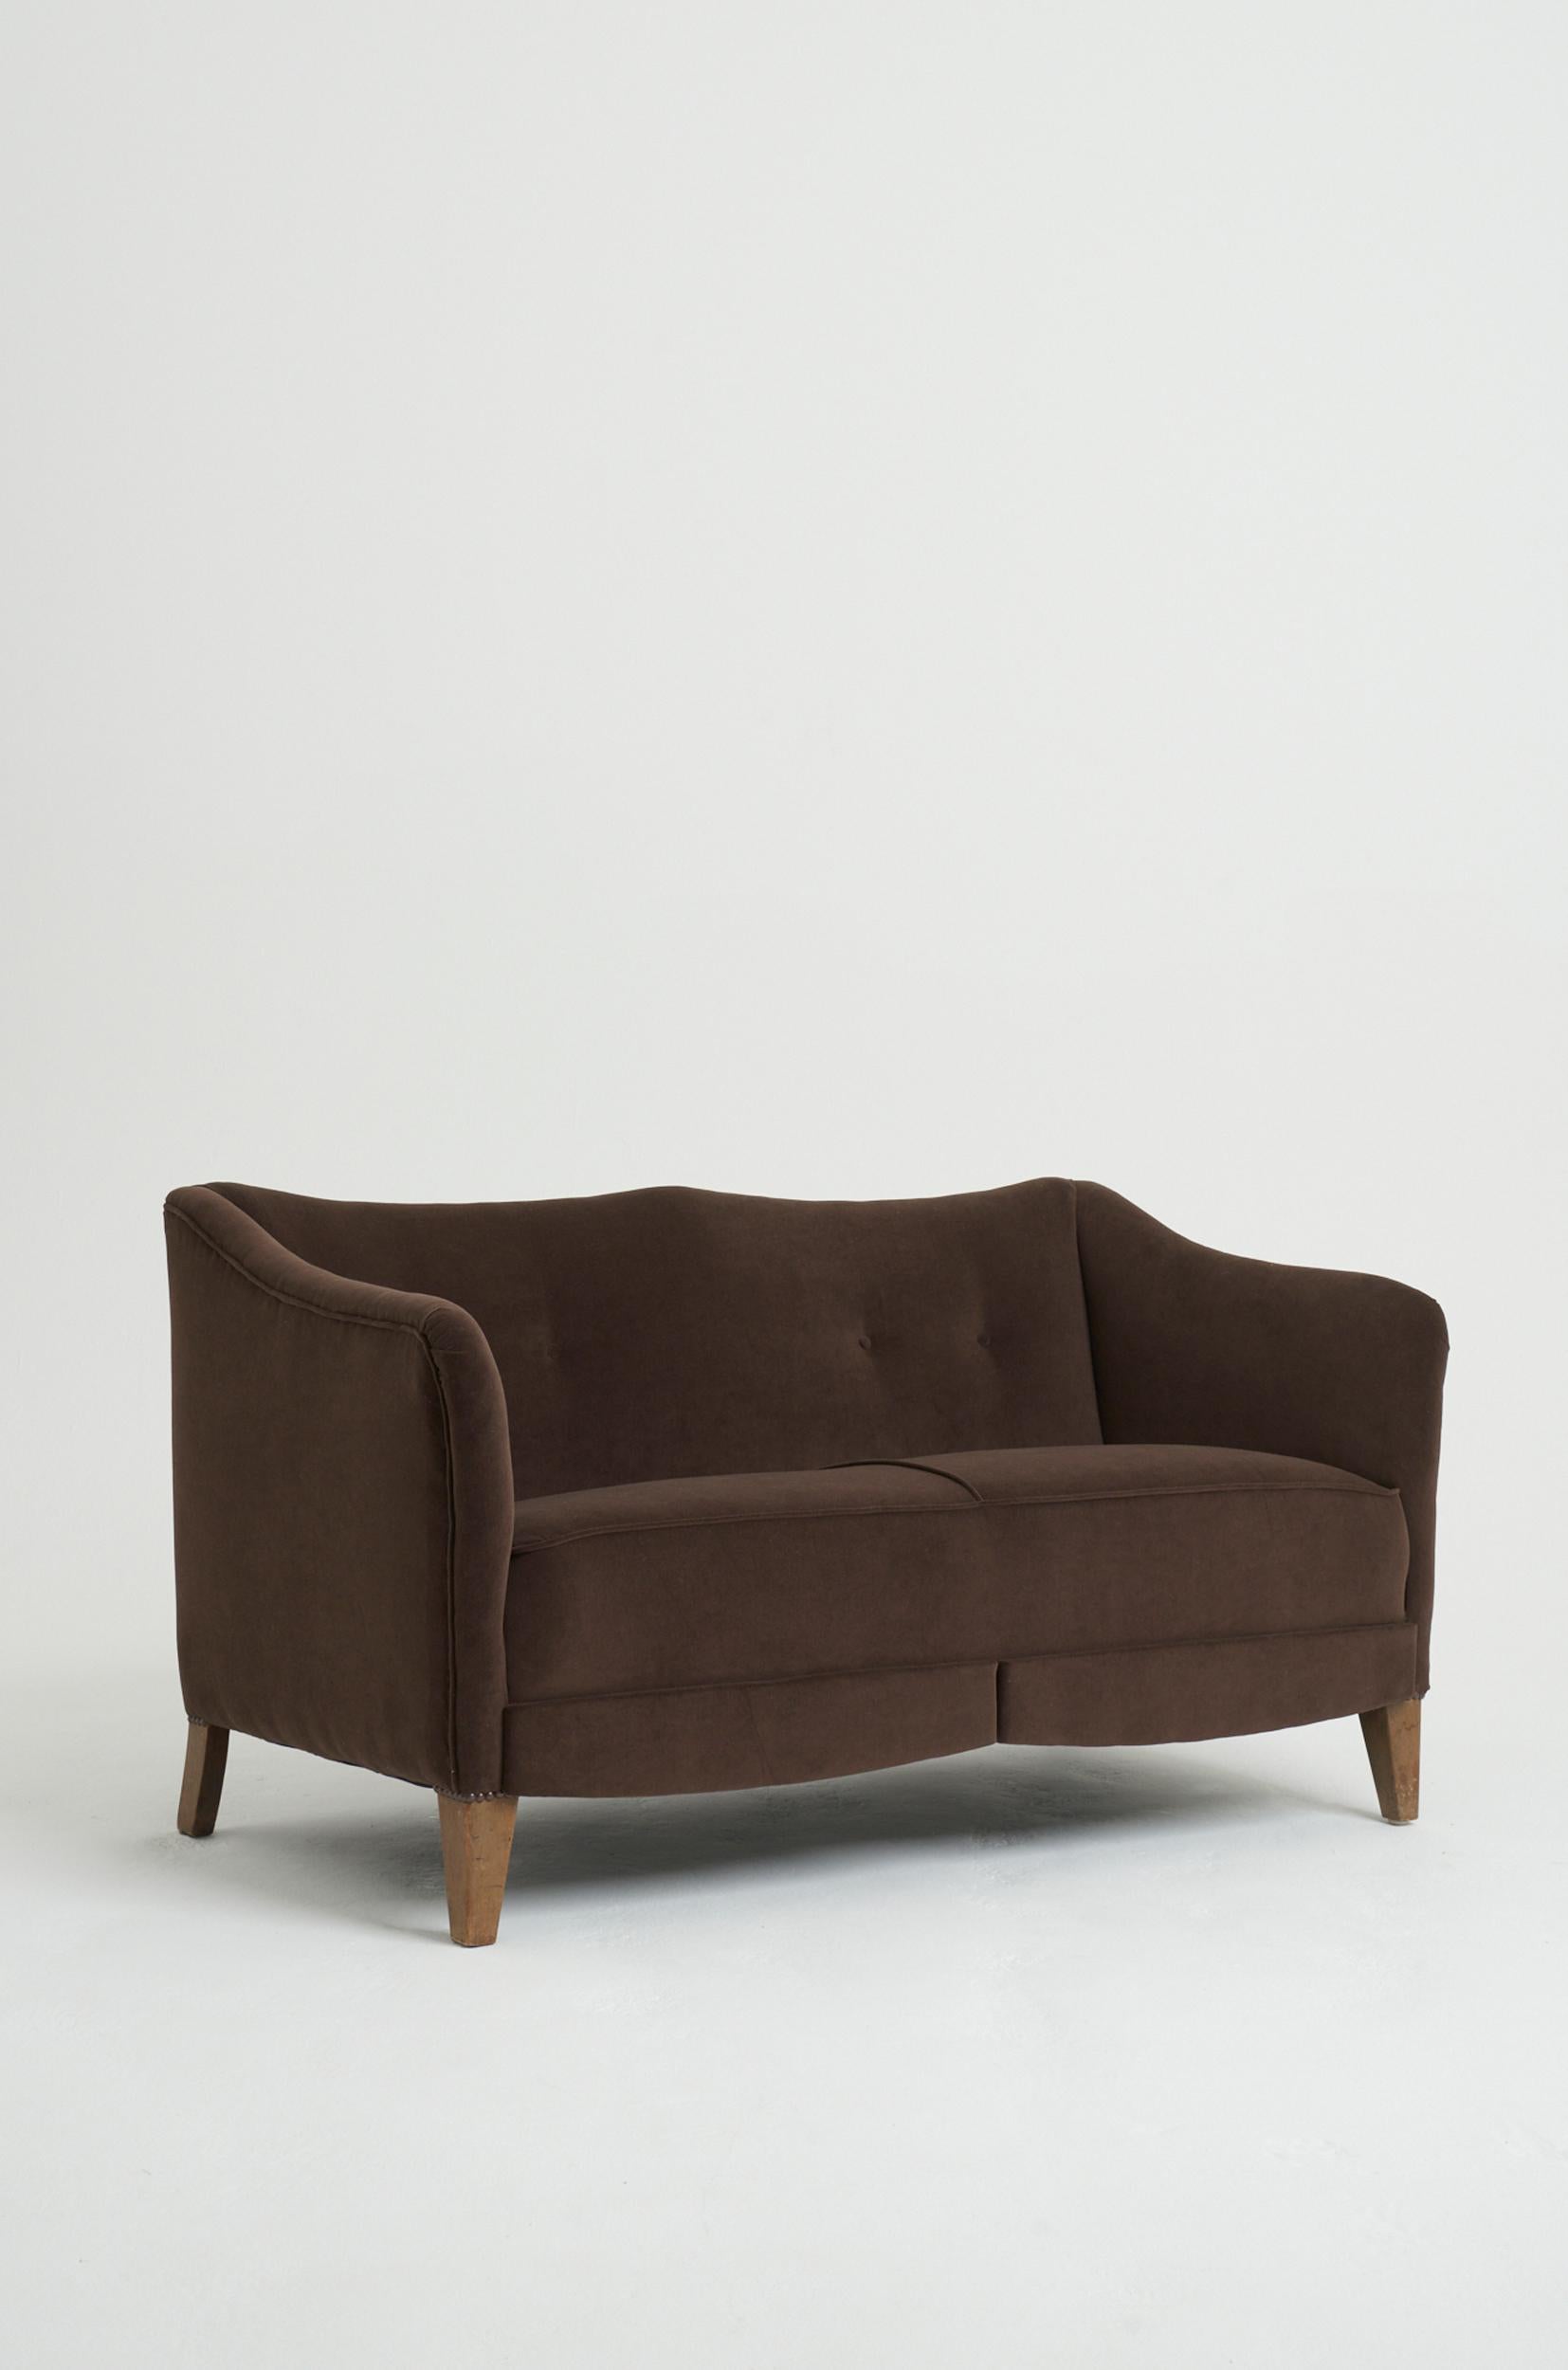 A two-seat buttoned sofa
Sweden, Circa 1930-1940
71 cm high by 131 cm wide by 66 cm depth,seat height 41 cm